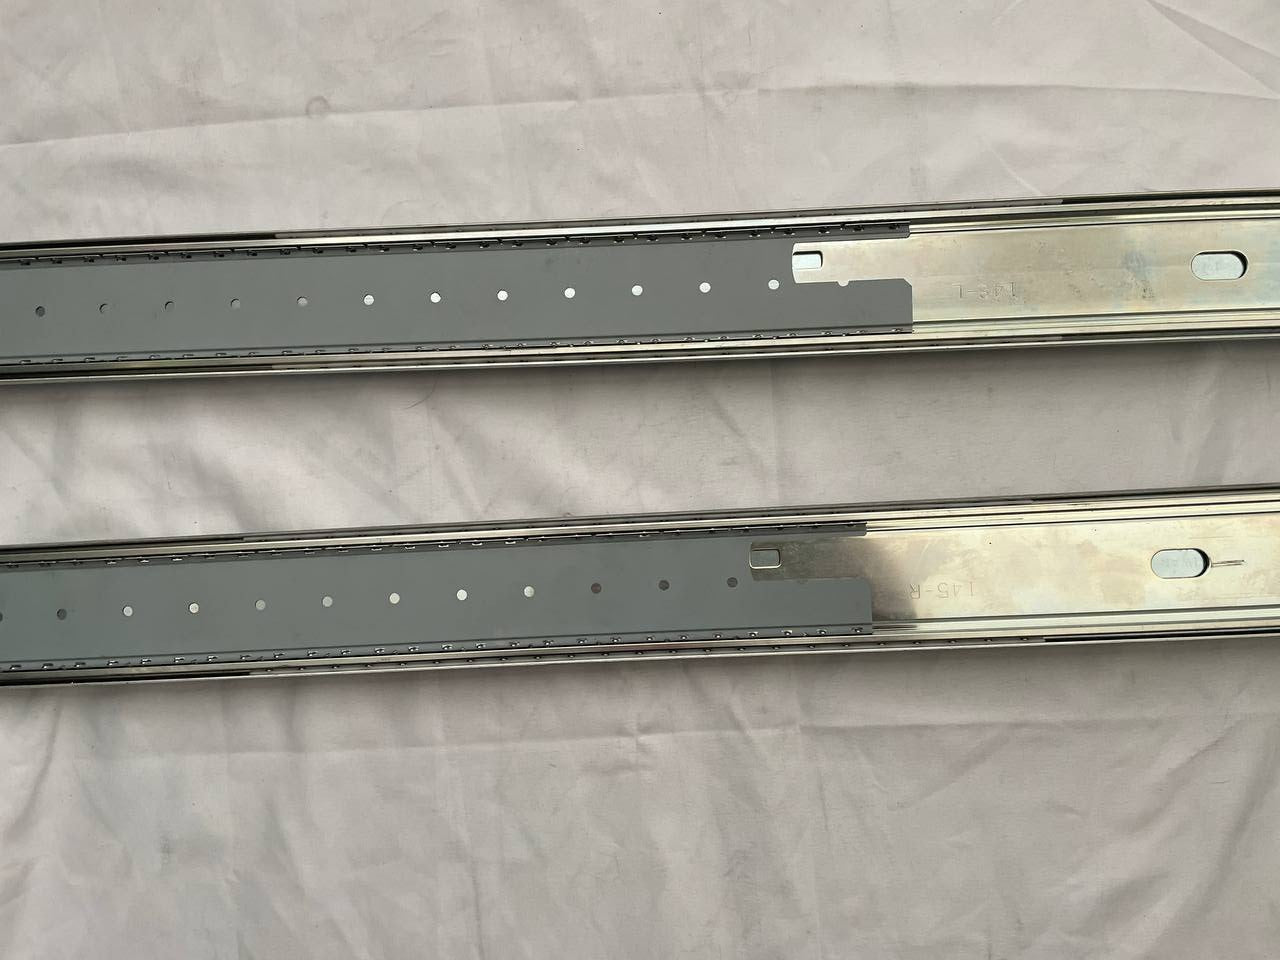 Dell 0J7H9H 0Y8P81 Rackmount Server Rails Left and Right Pair B3